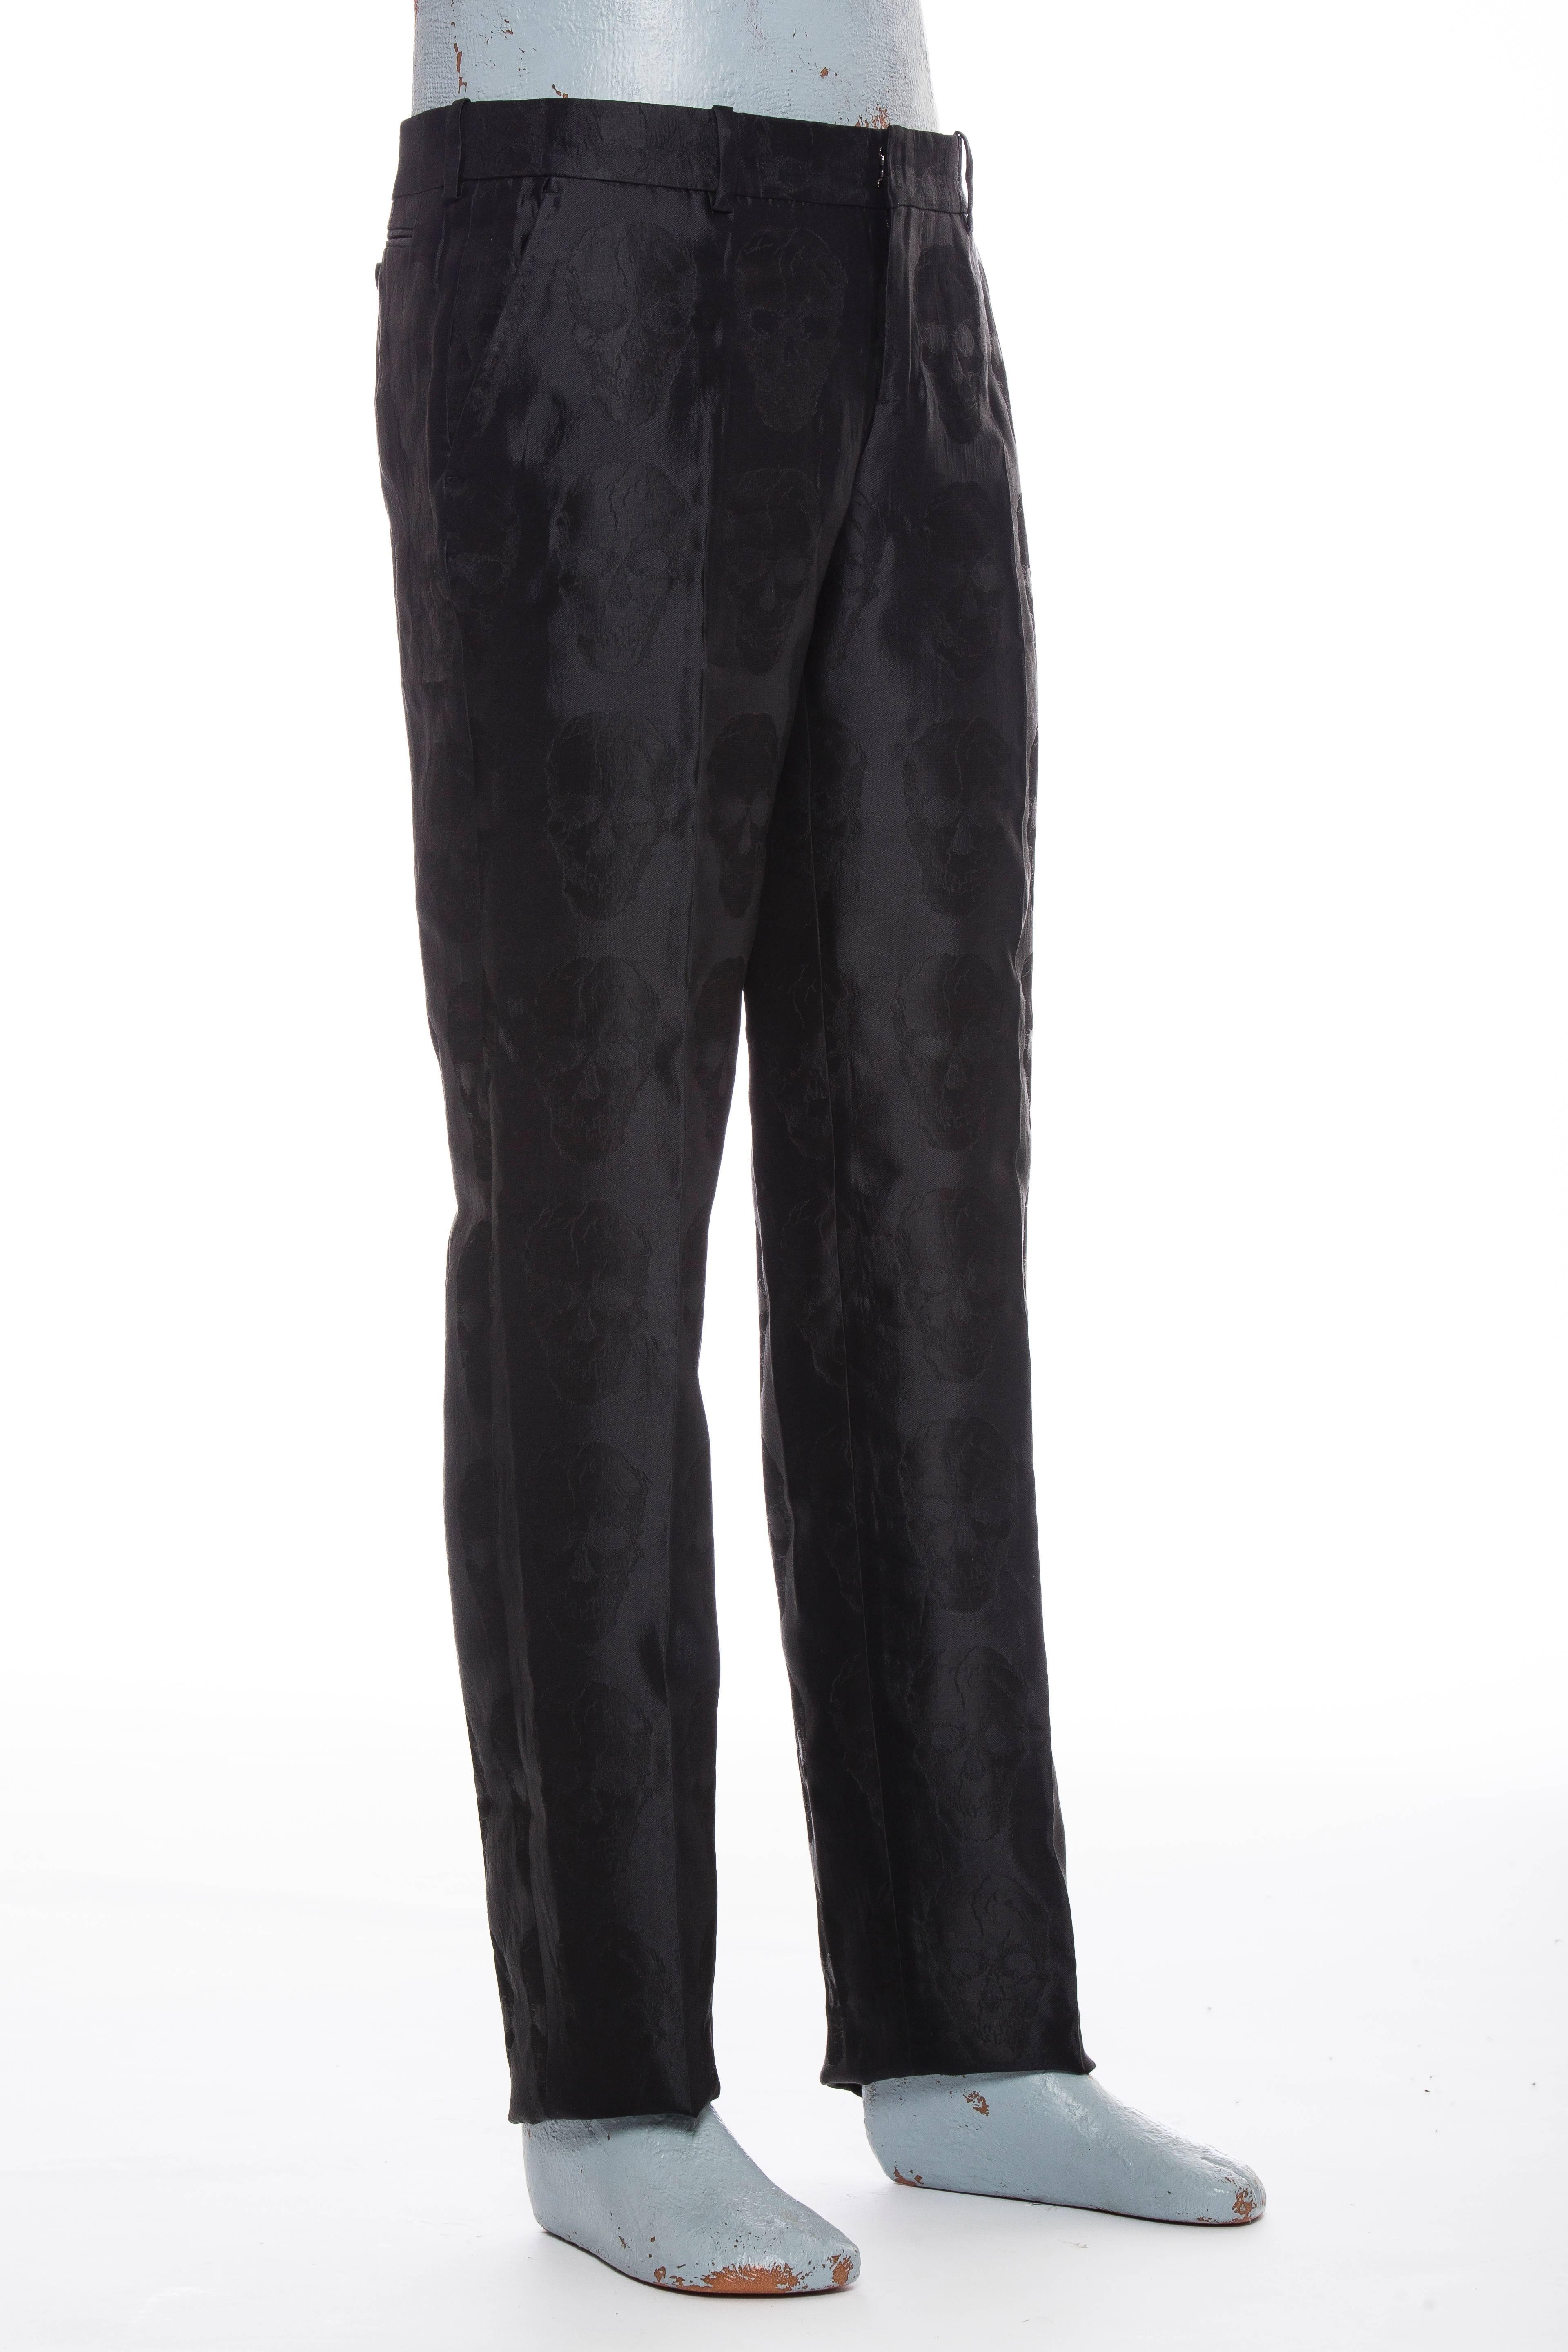  Alexander McQueen men's silk straight-leg pants with skull pattern throughout, dual slit pockets at sides, welt pockets at back, tonal stitching and hidden zip closure at center front.

IT. 48
US.32

Waist 33”, Rise 9”, Inseam 36”, Leg Opening